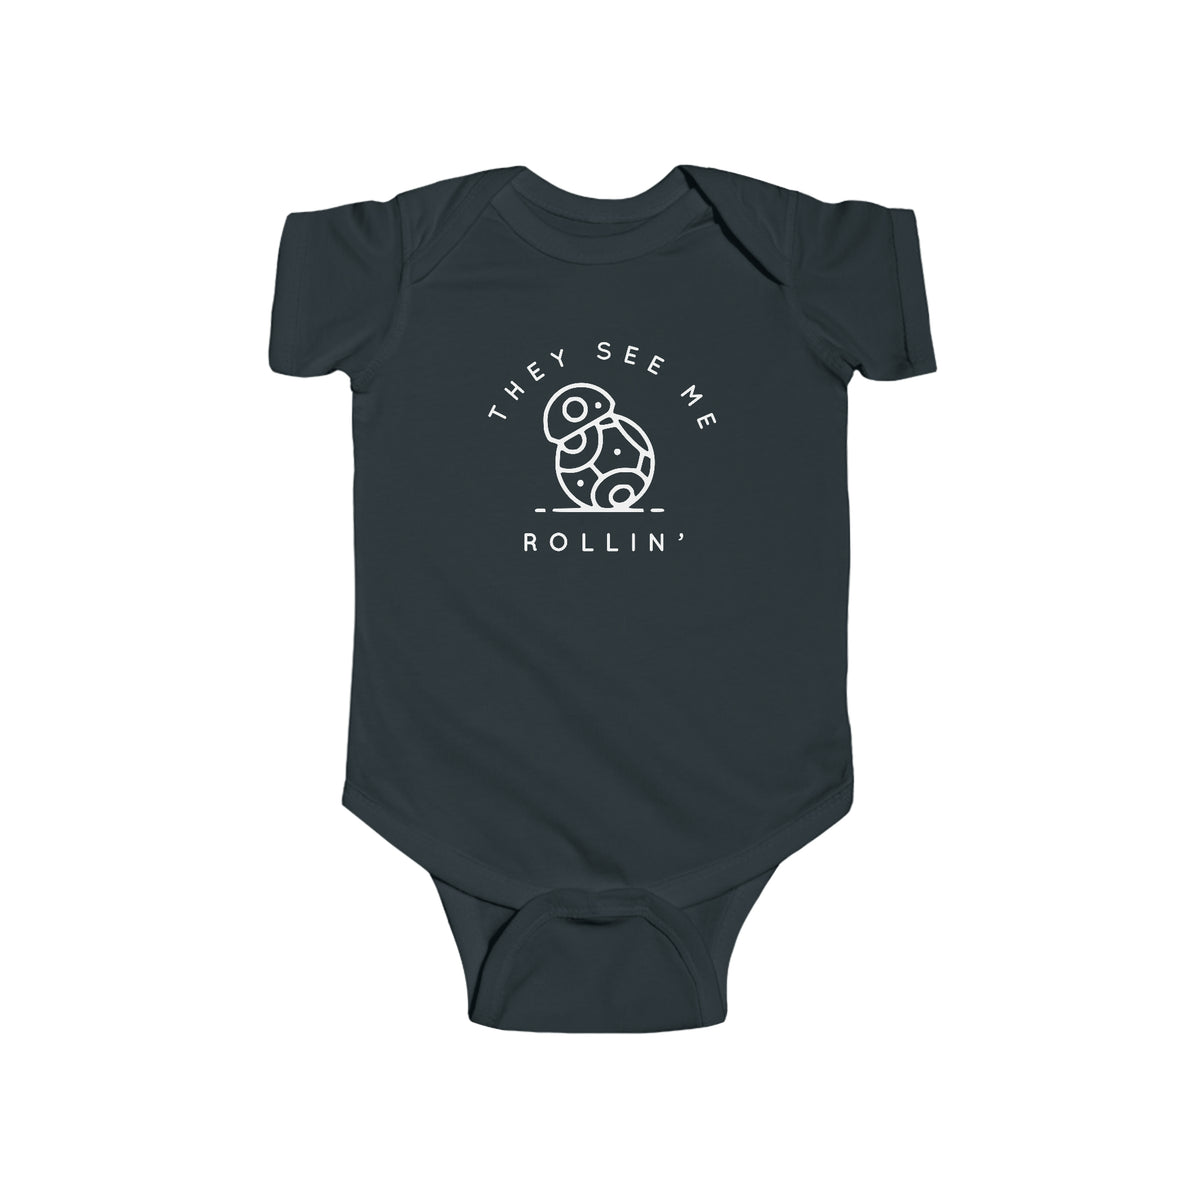 They See Me Rollin' Rabbit Skins Infant Fine Jersey Bodysuit